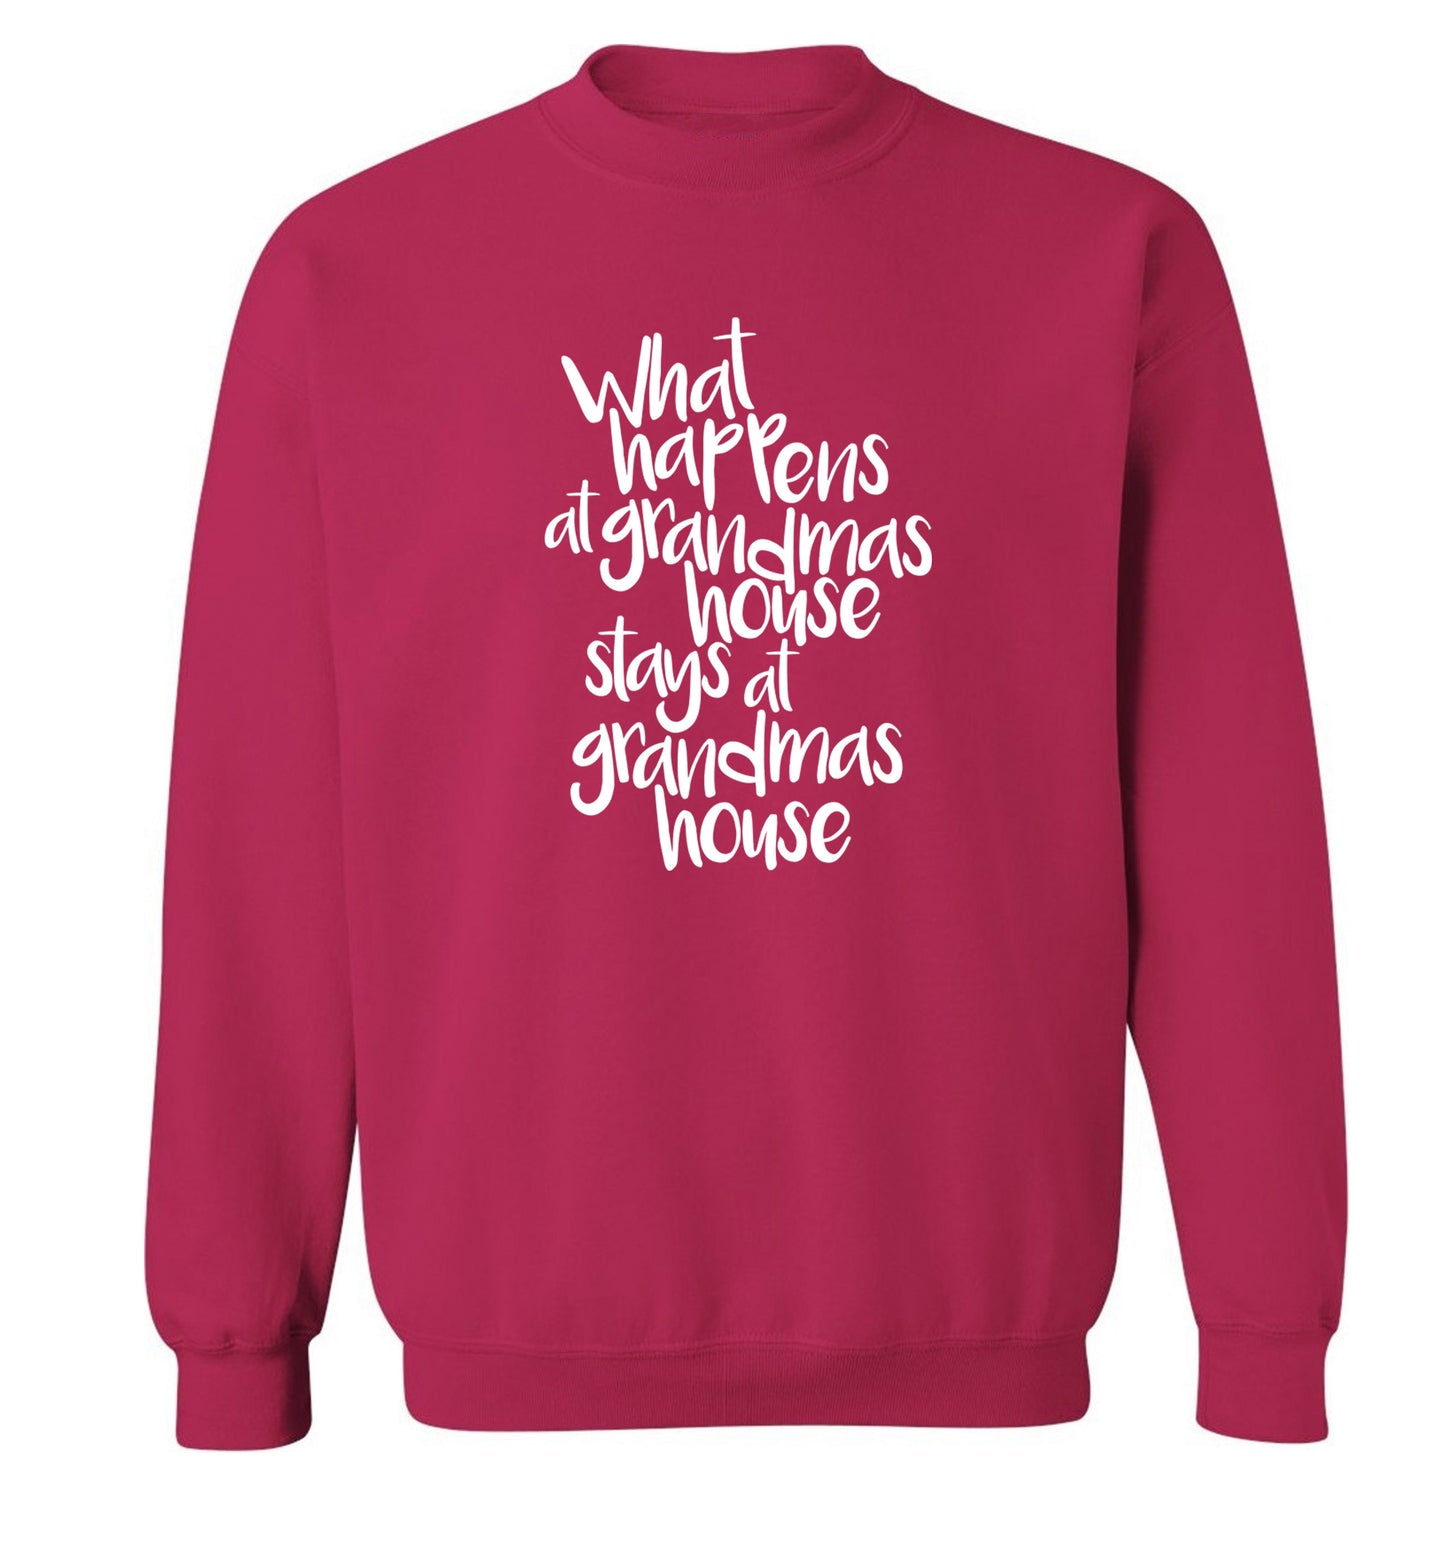 What happens at grandmas house stays at grandmas house Adult's unisex pink Sweater 2XL